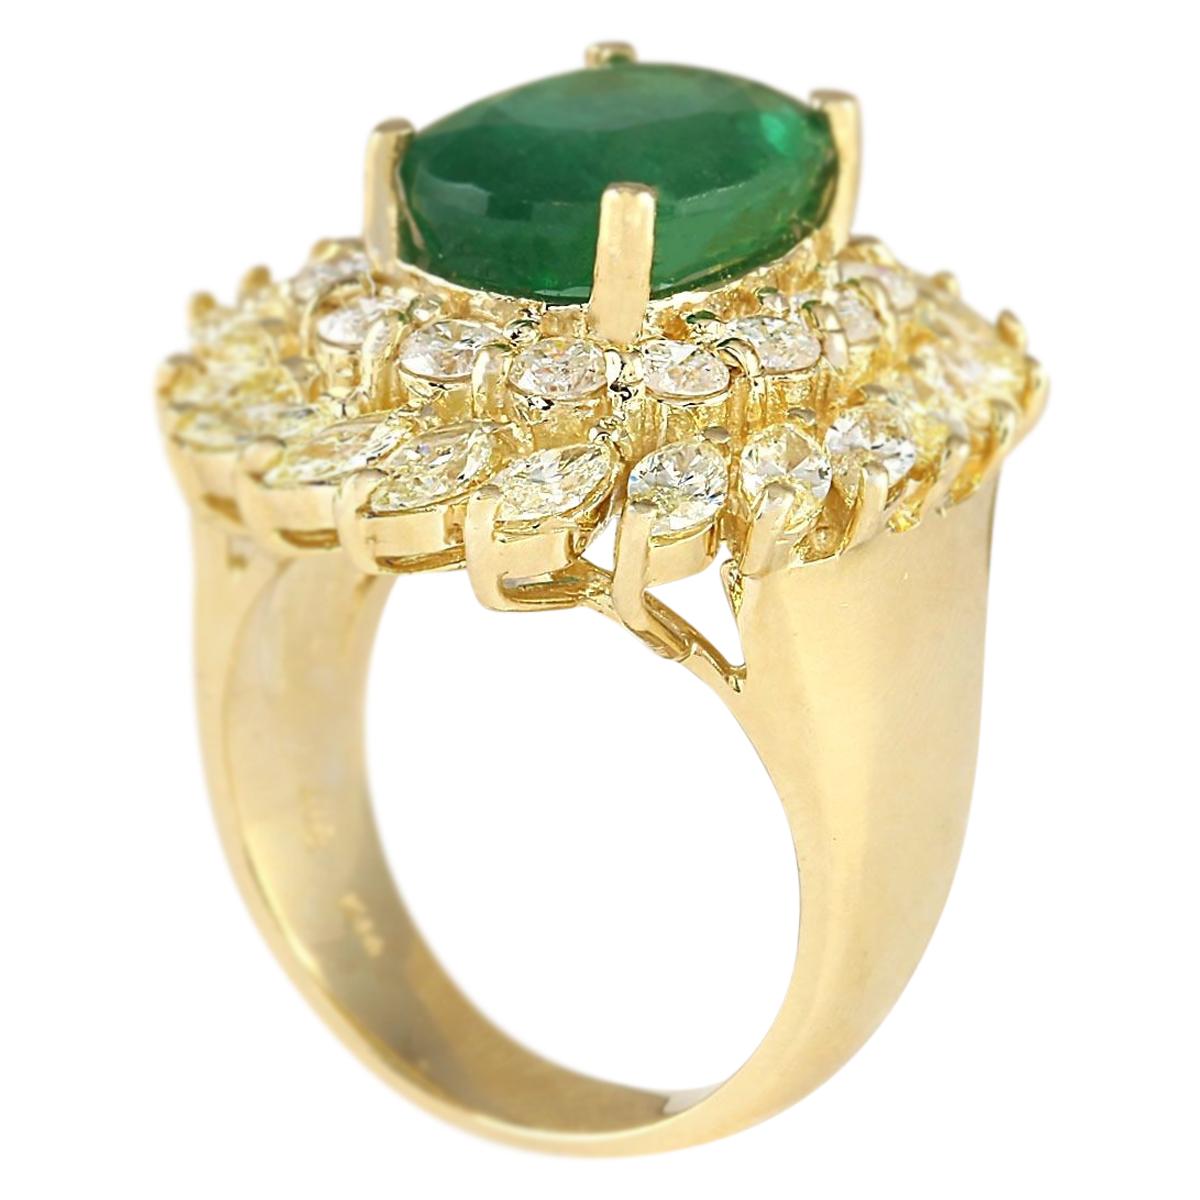 Oval Cut Natural Emerald 14 Karat Yellow Gold Diamond Ring For Sale